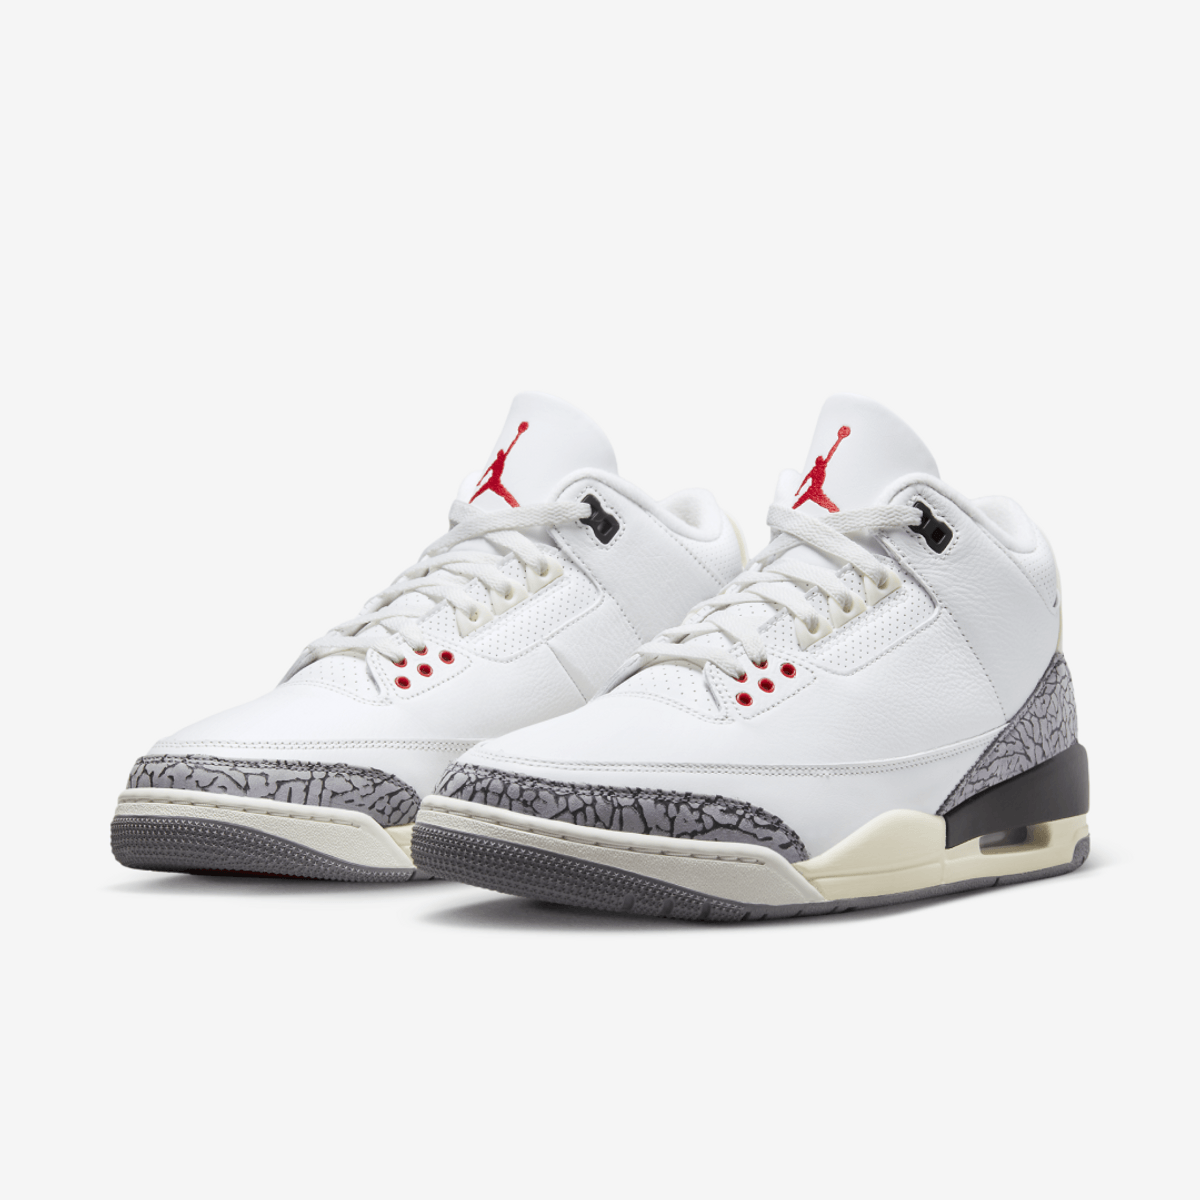 How To Cop The Air Jordan 3 White Cement Reimagined For Retail